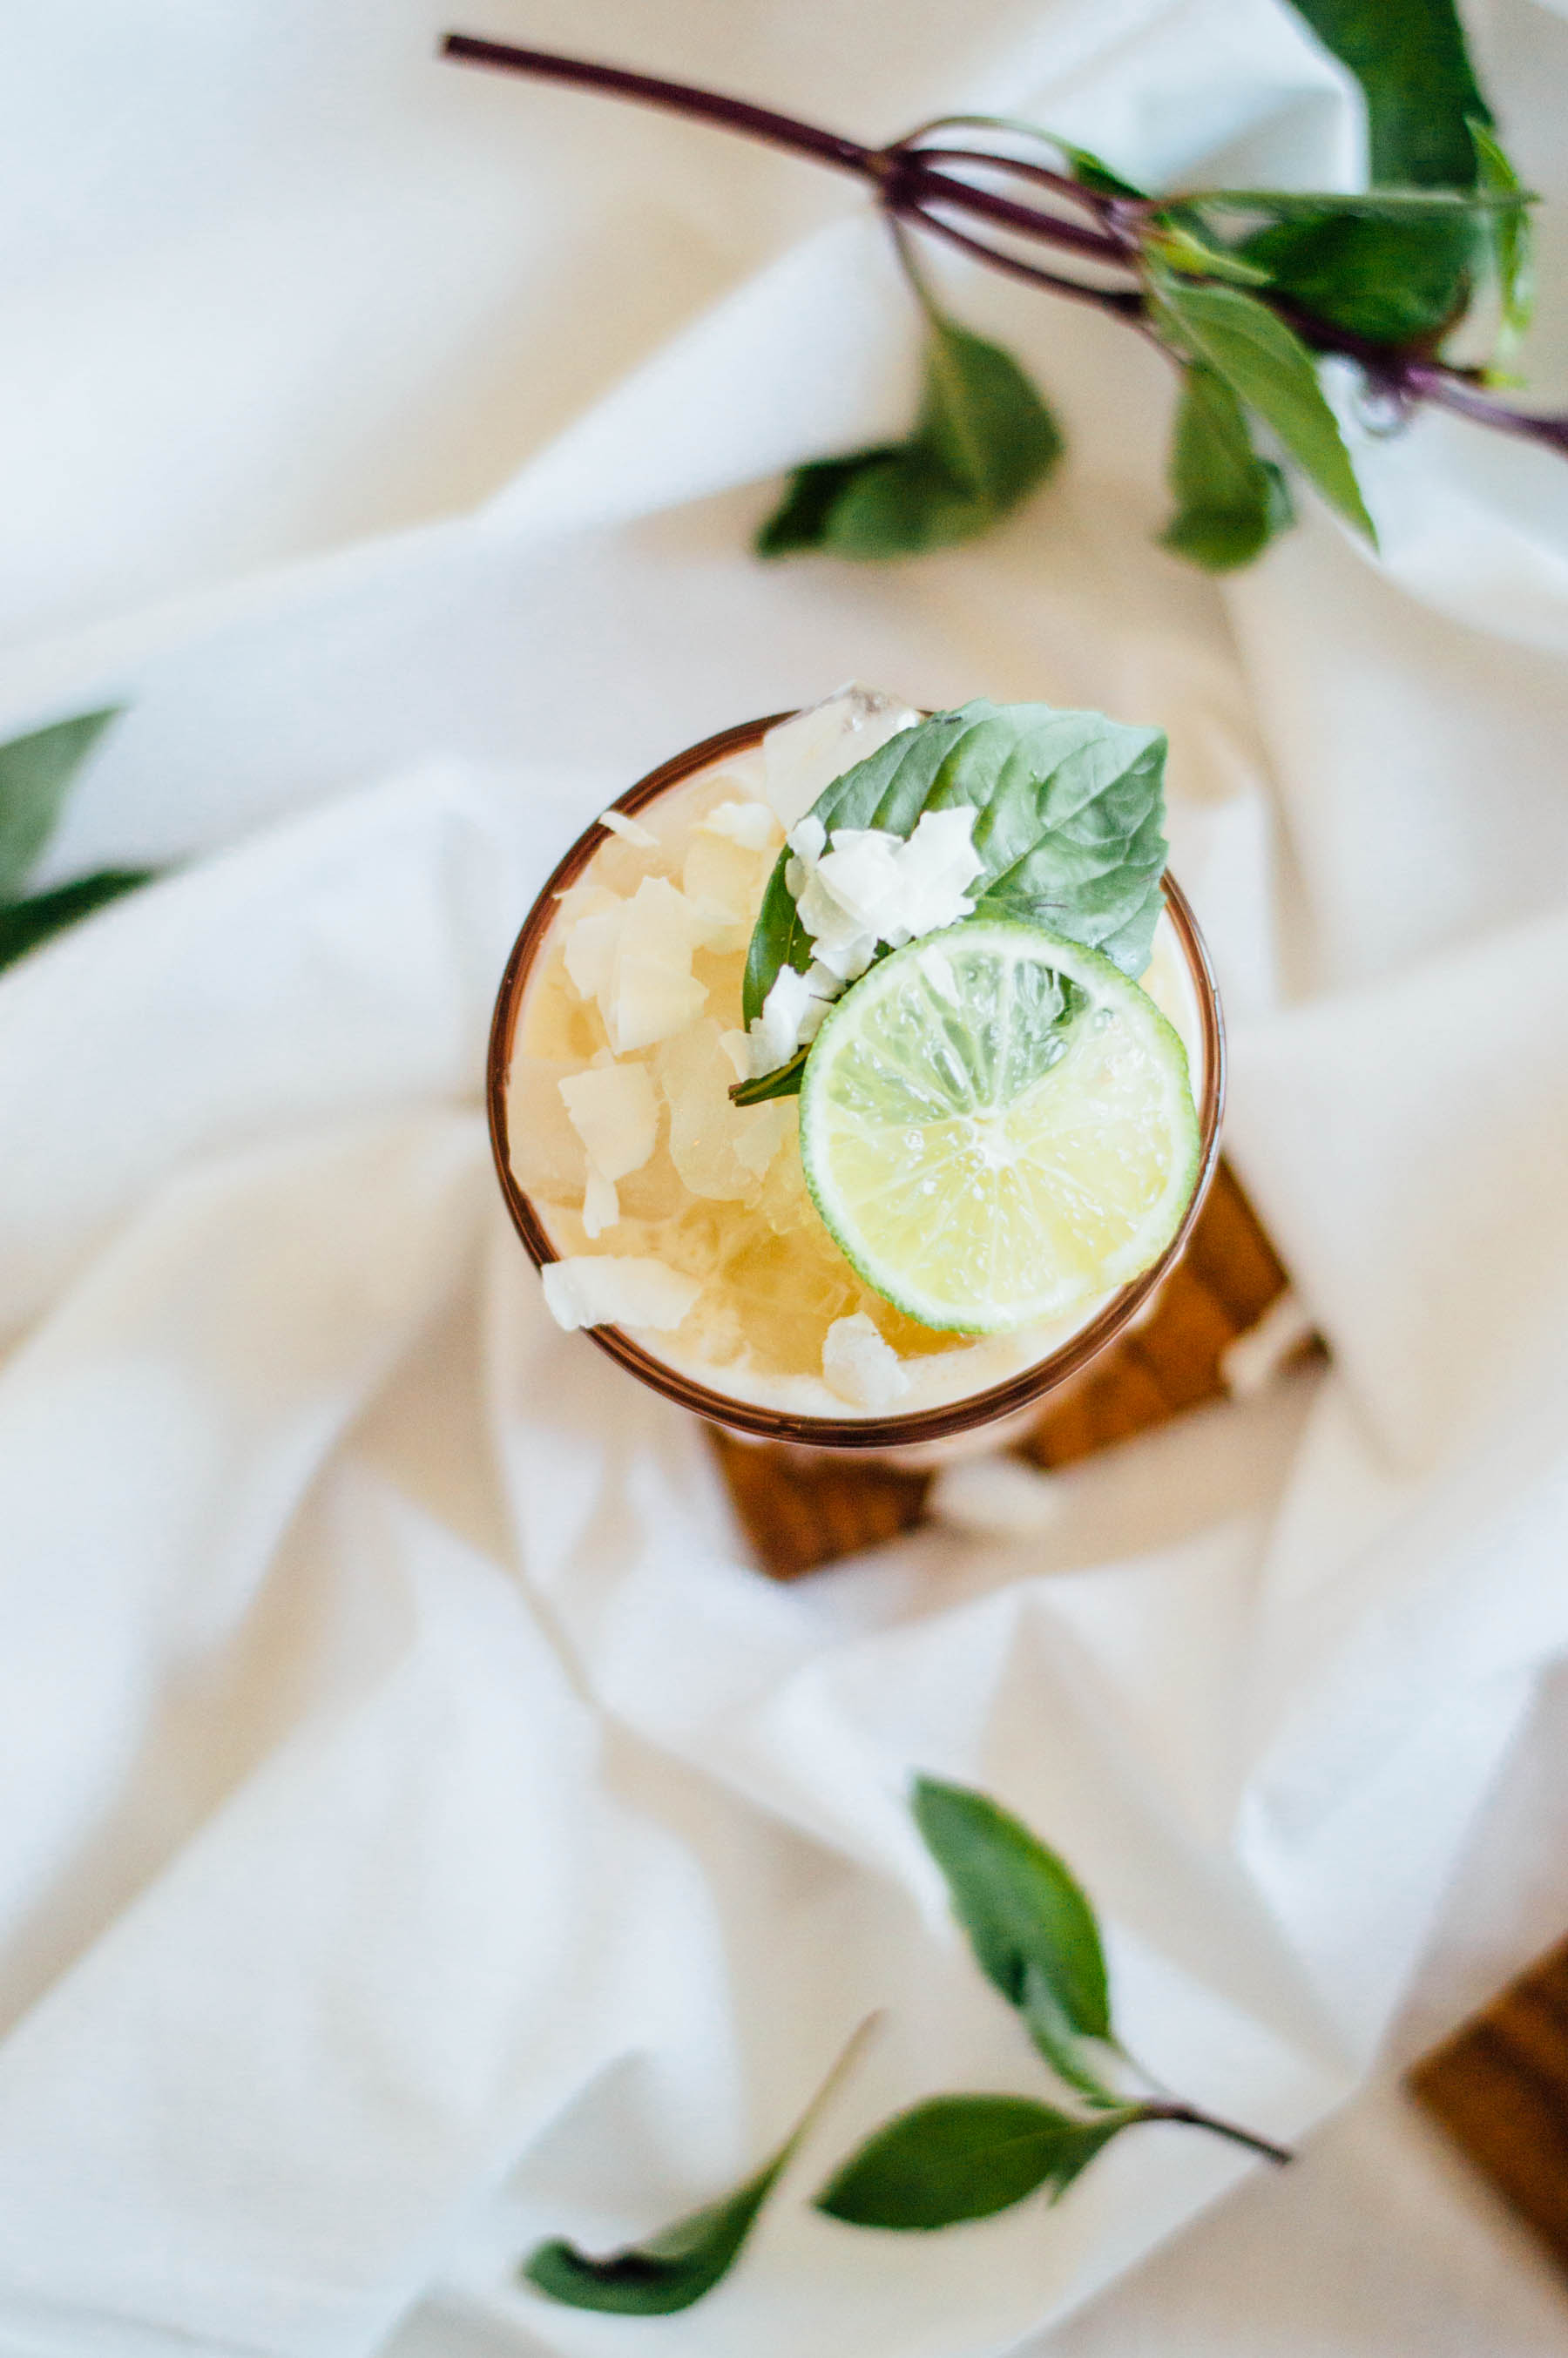 Positively delicious Tropical Rum Coco-Lada cocktail recipe with coconut flavor and a hint of pineapple. SO perfect for any season! | bygabriella.co